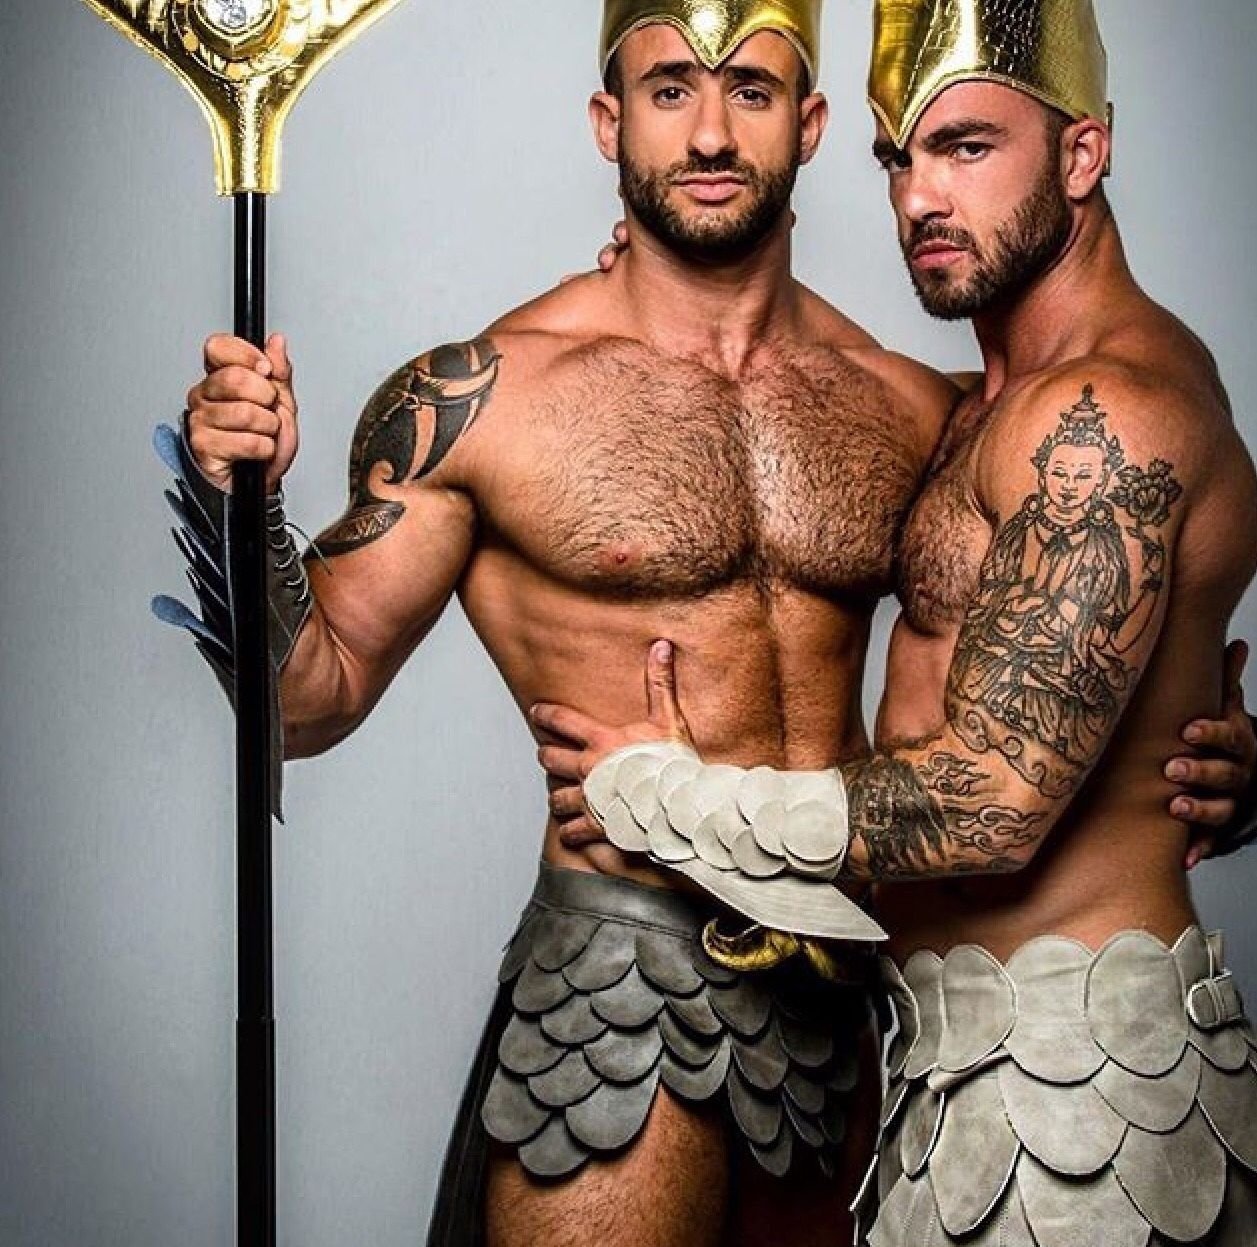 10 Great Gay Couple Halloween Costume Ideas pinbobby d on cosplay pinterest hero costumes and gay 2022